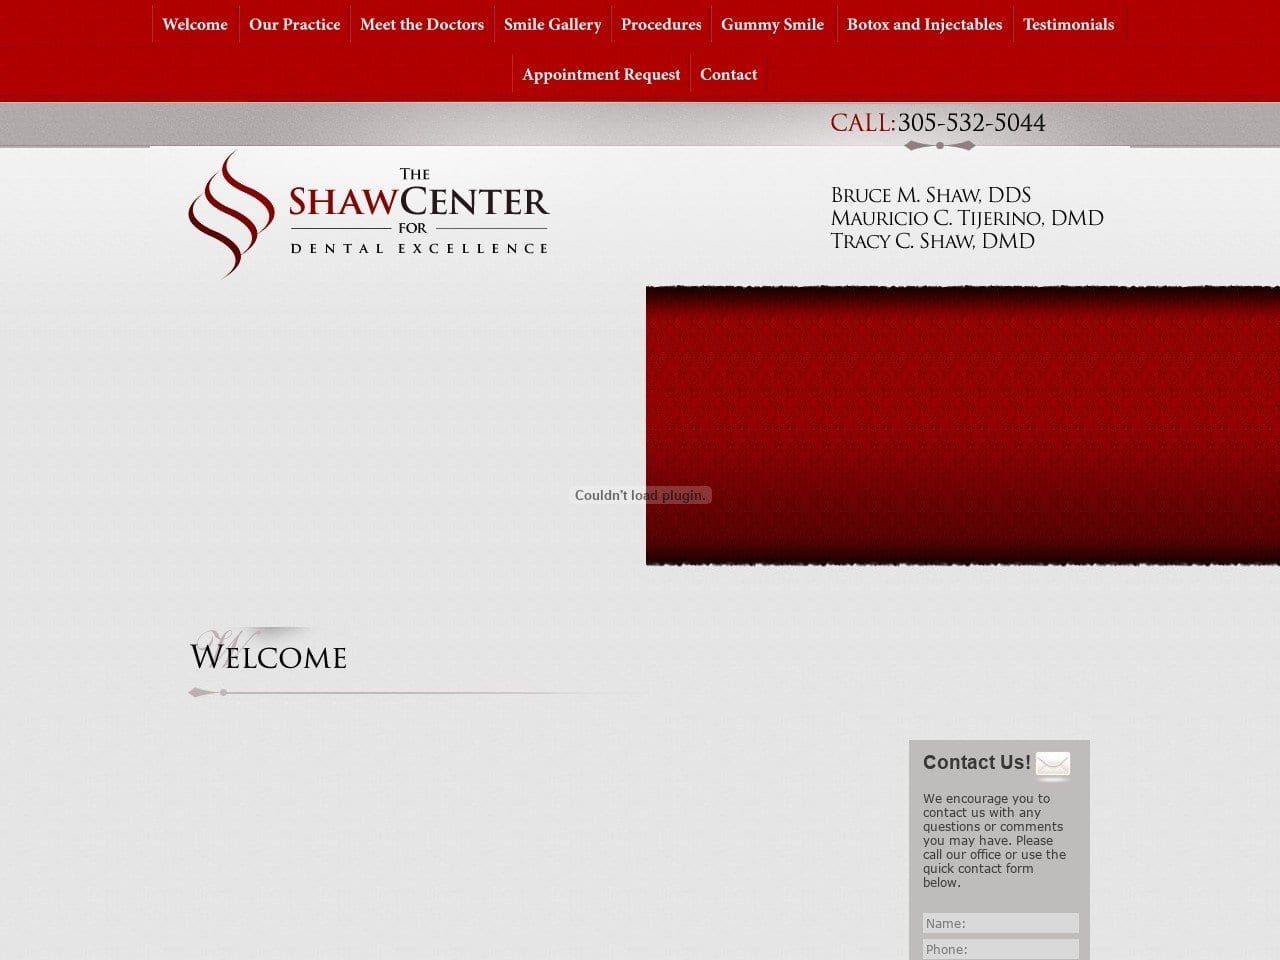 The SHAW Center for Dental Excellence Website Screenshot from theshawdentalcenter.com